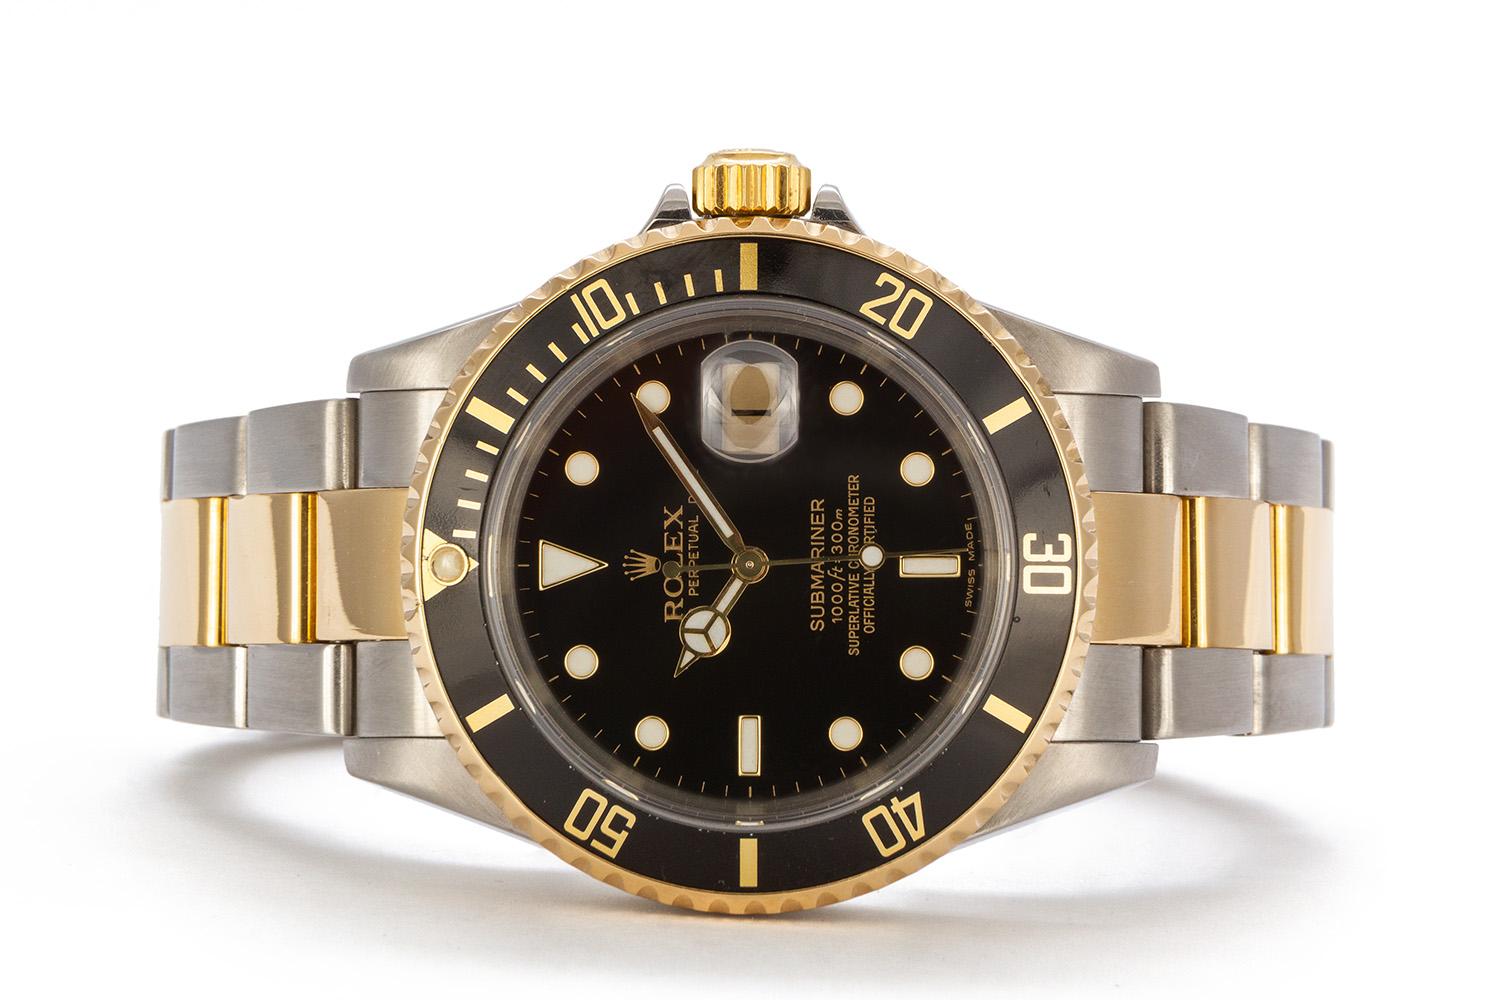 We are pleased to offer this 2006 Rolex Mens Two Tone Submariner 16613. It features a 40mm stainless steel case with black dial, 18k yellow gold bezel with black metal insert, stainless steel & 18k yellow gold bracelet with polished center links. It